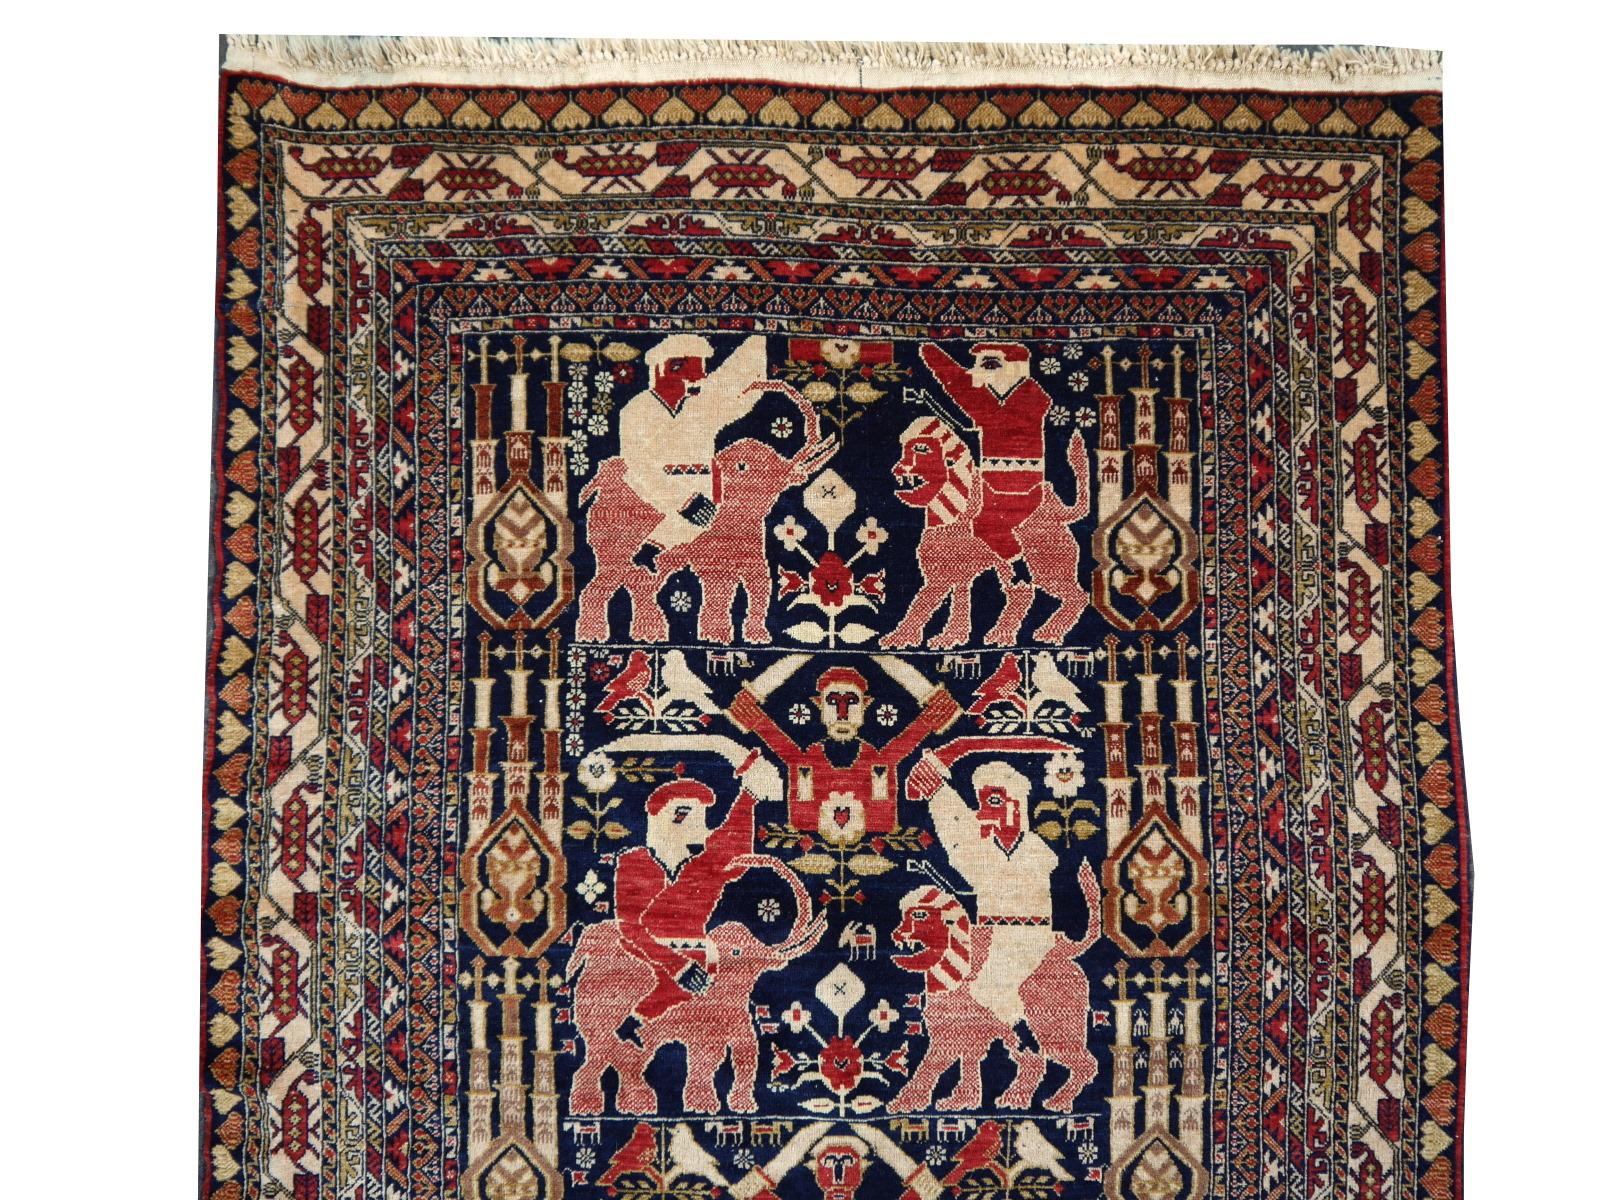 Hand-Knotted Vintage Afghan War Rug with Figural Pictorial Lions Elephants Warriors 6 x 4 ft